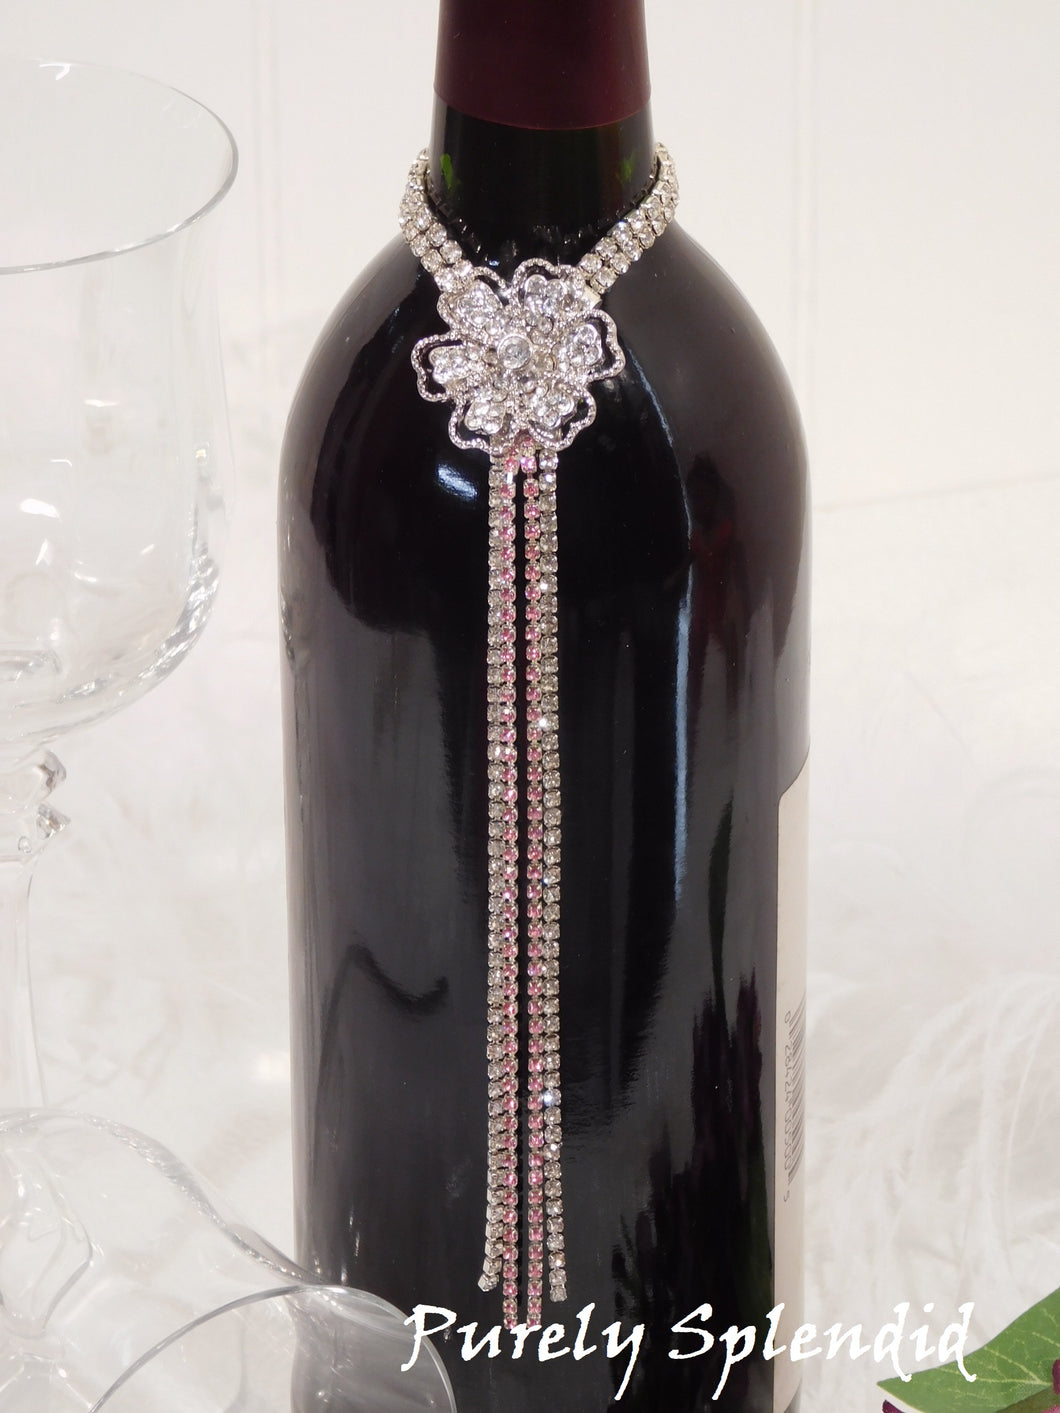 close up picture of the Sparkling Rhinestone Flower Bottle Bling